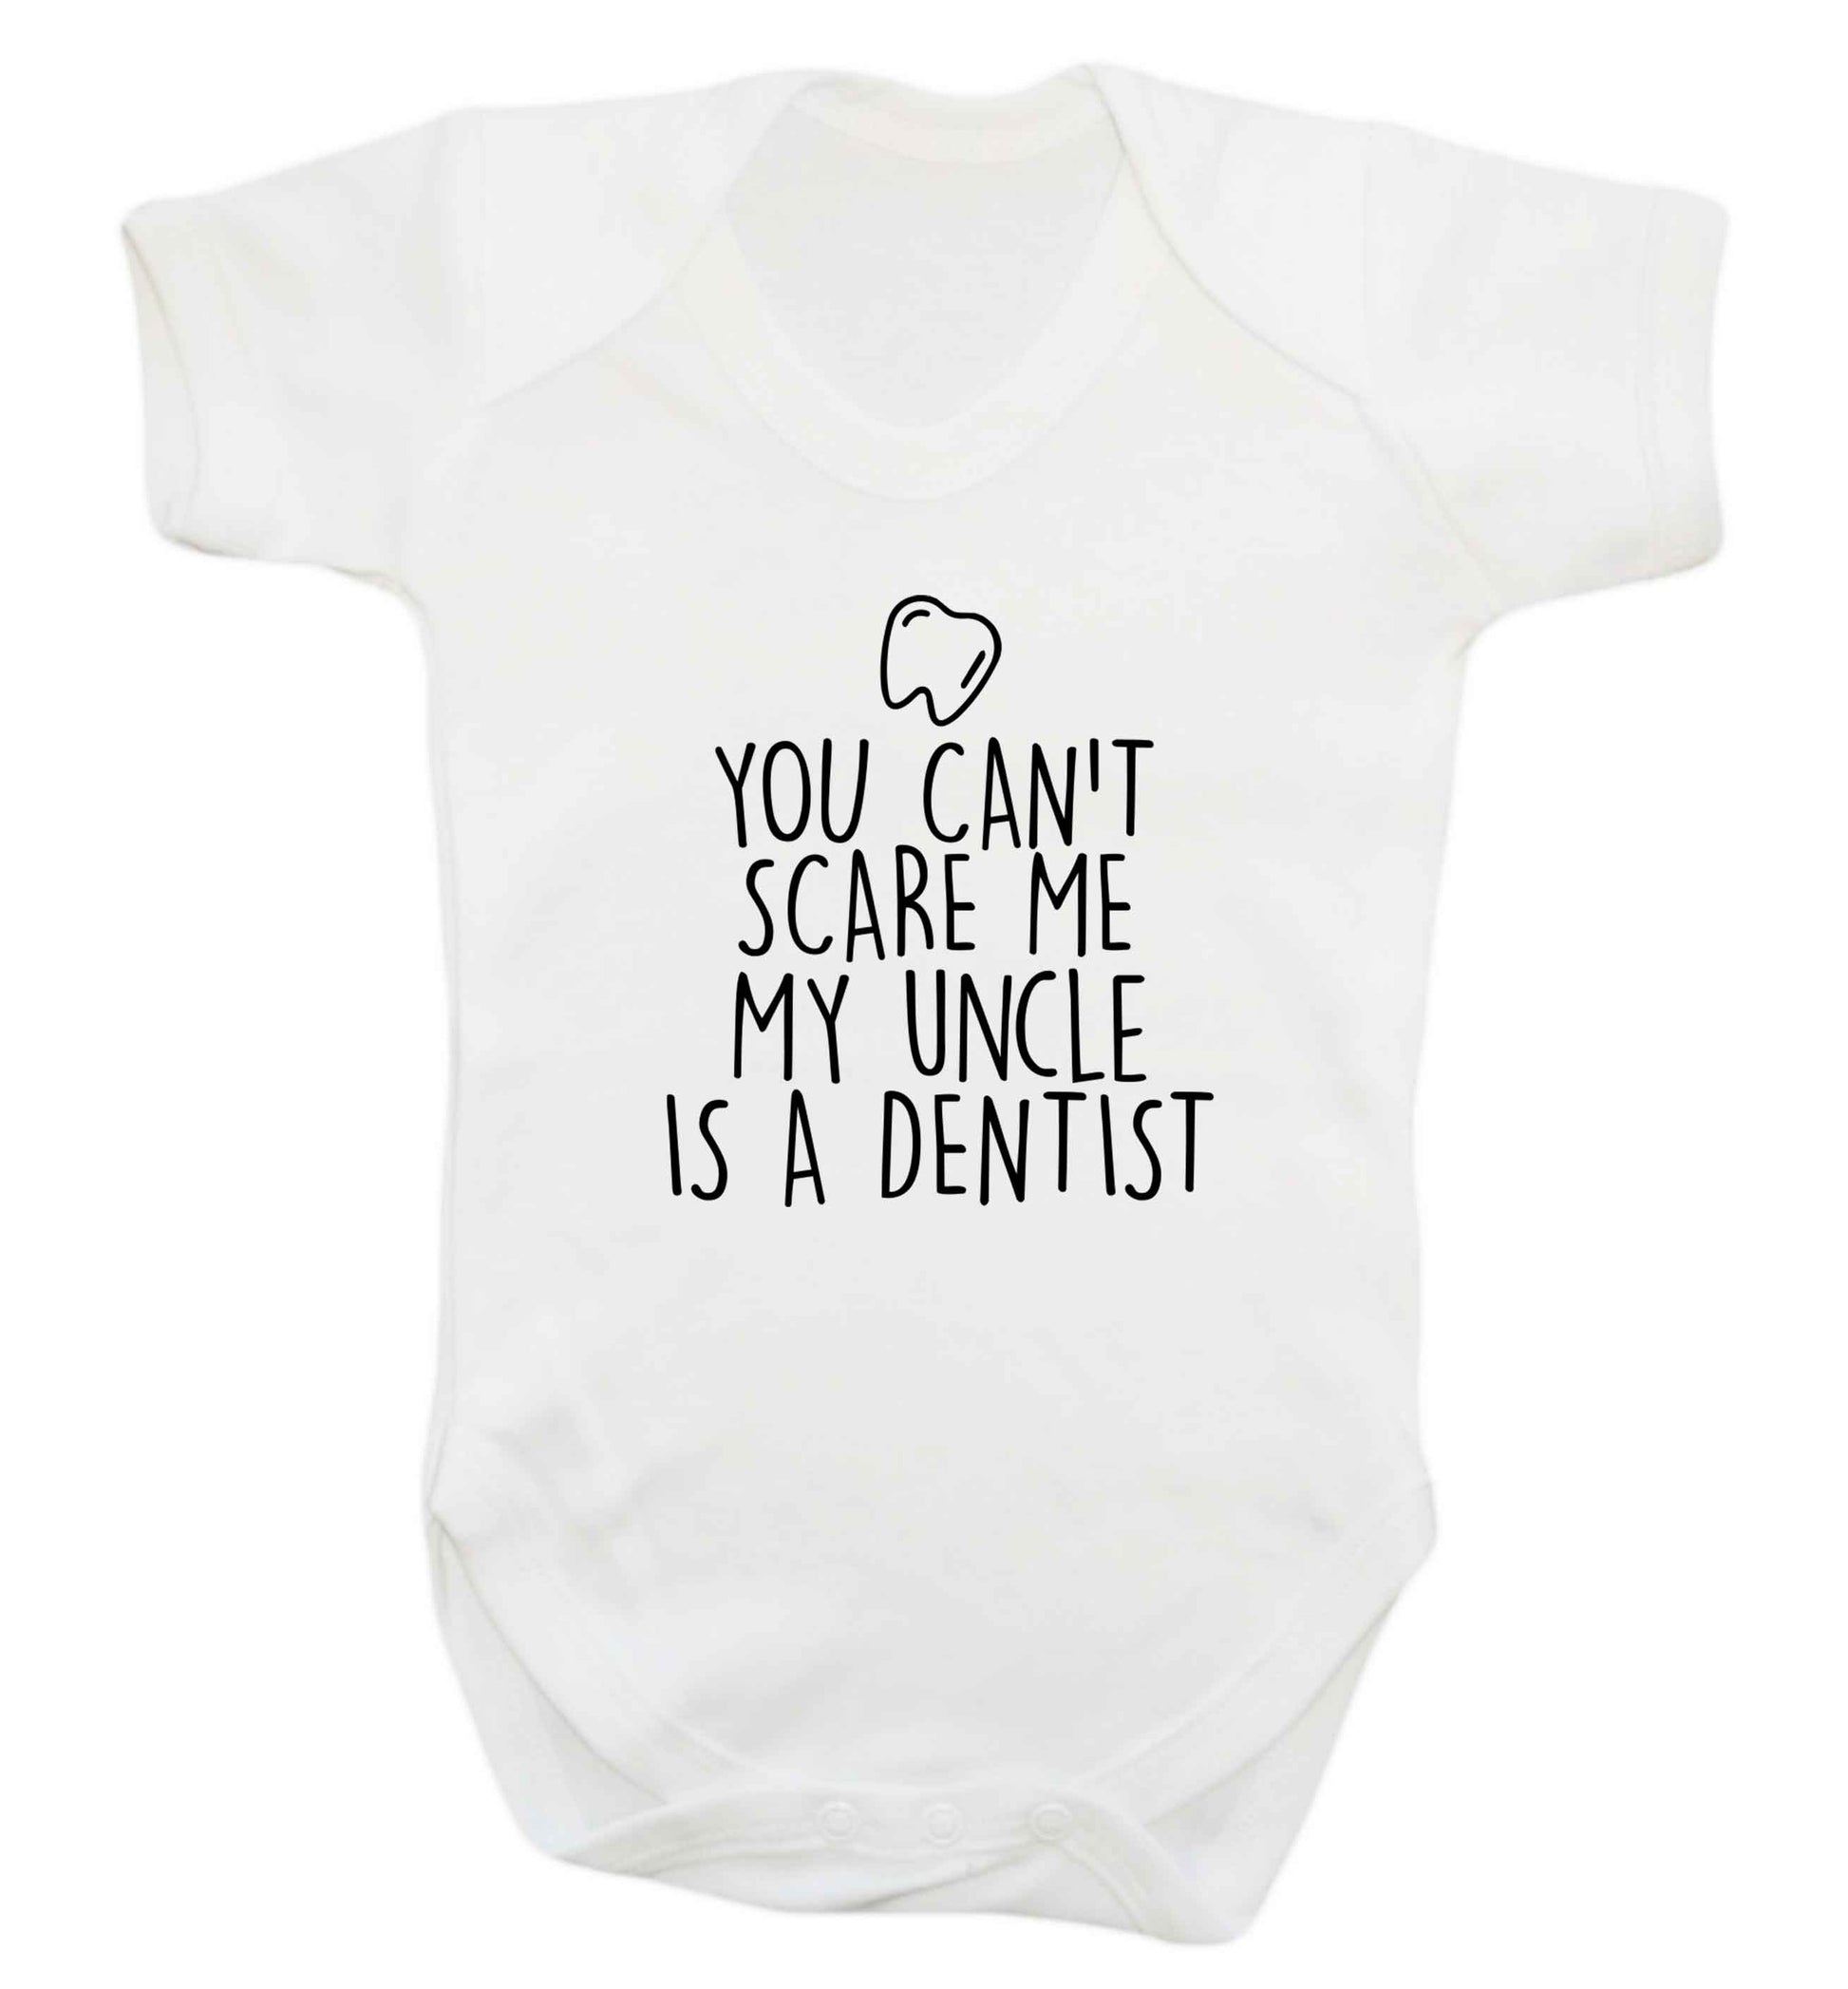 You can't scare me my uncle is a dentist baby vest white 18-24 months